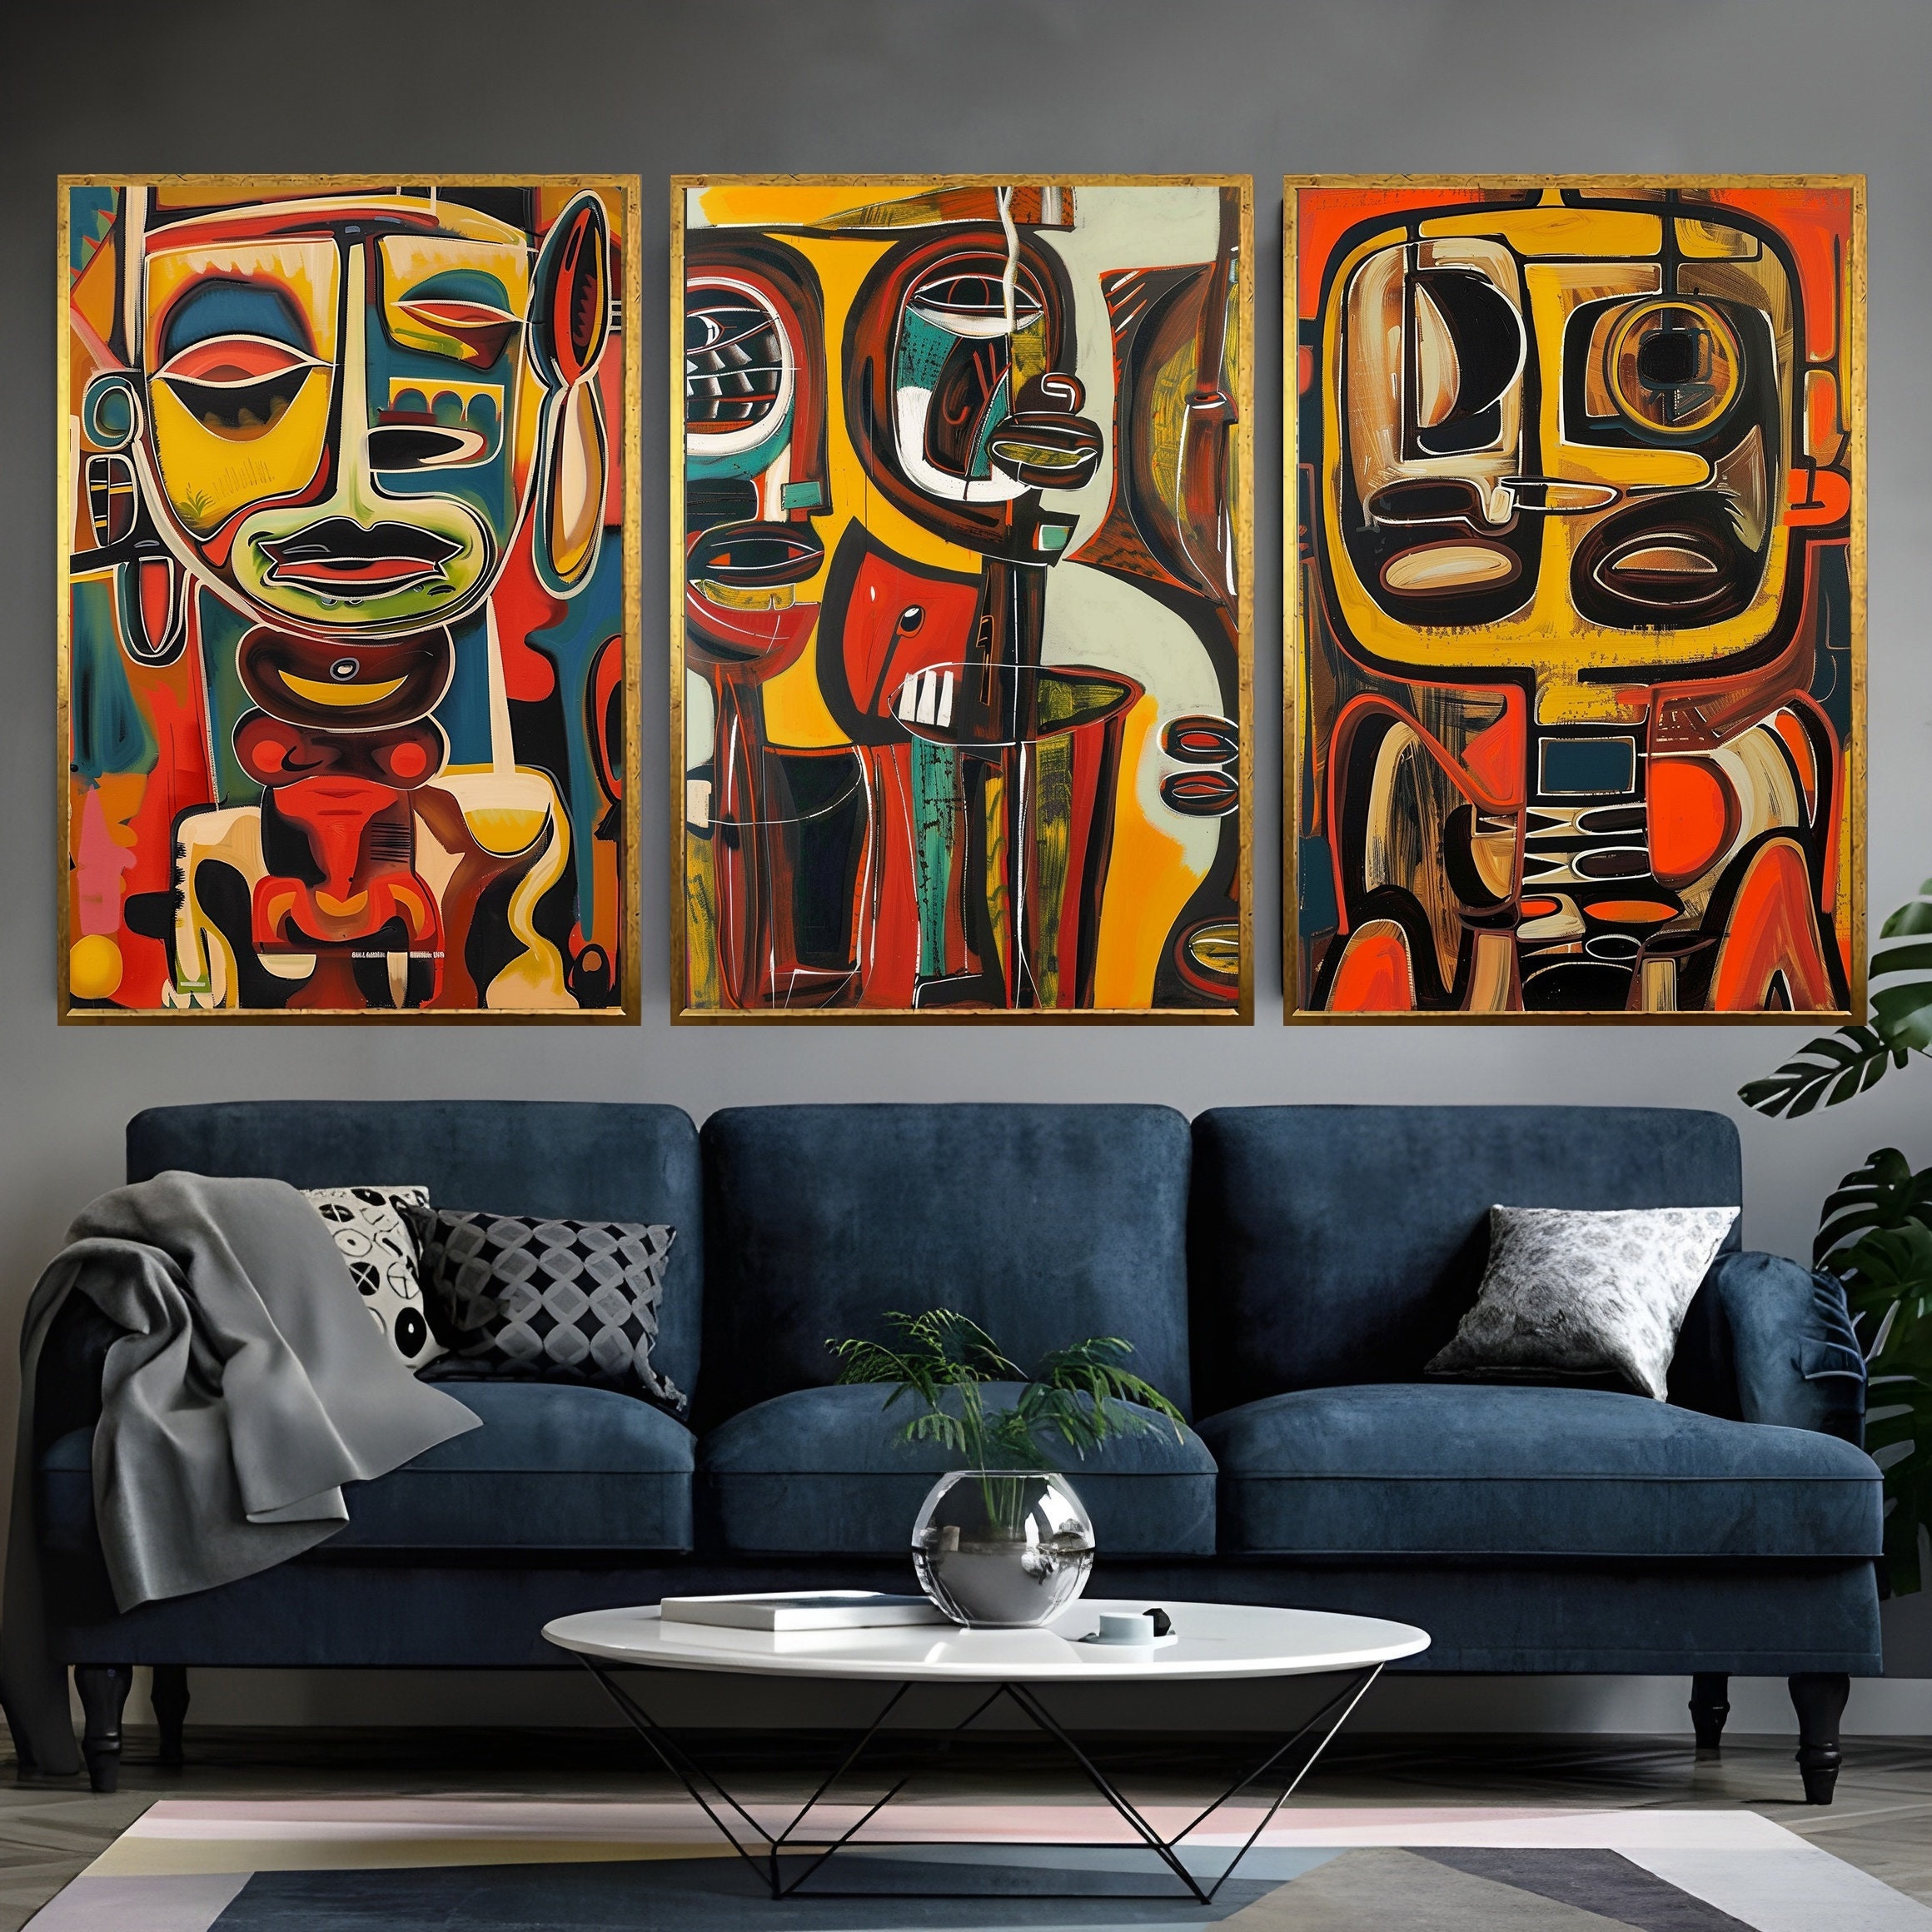 

Modern African Abstract Portrait Canvas Wall Art, Set Of 3, 15.7 X 23.6 Inch, Frameless Posters For Living Room Decor, Indoor Canvas Artwork, Ethnic Themed Decorative Hanging Paintings